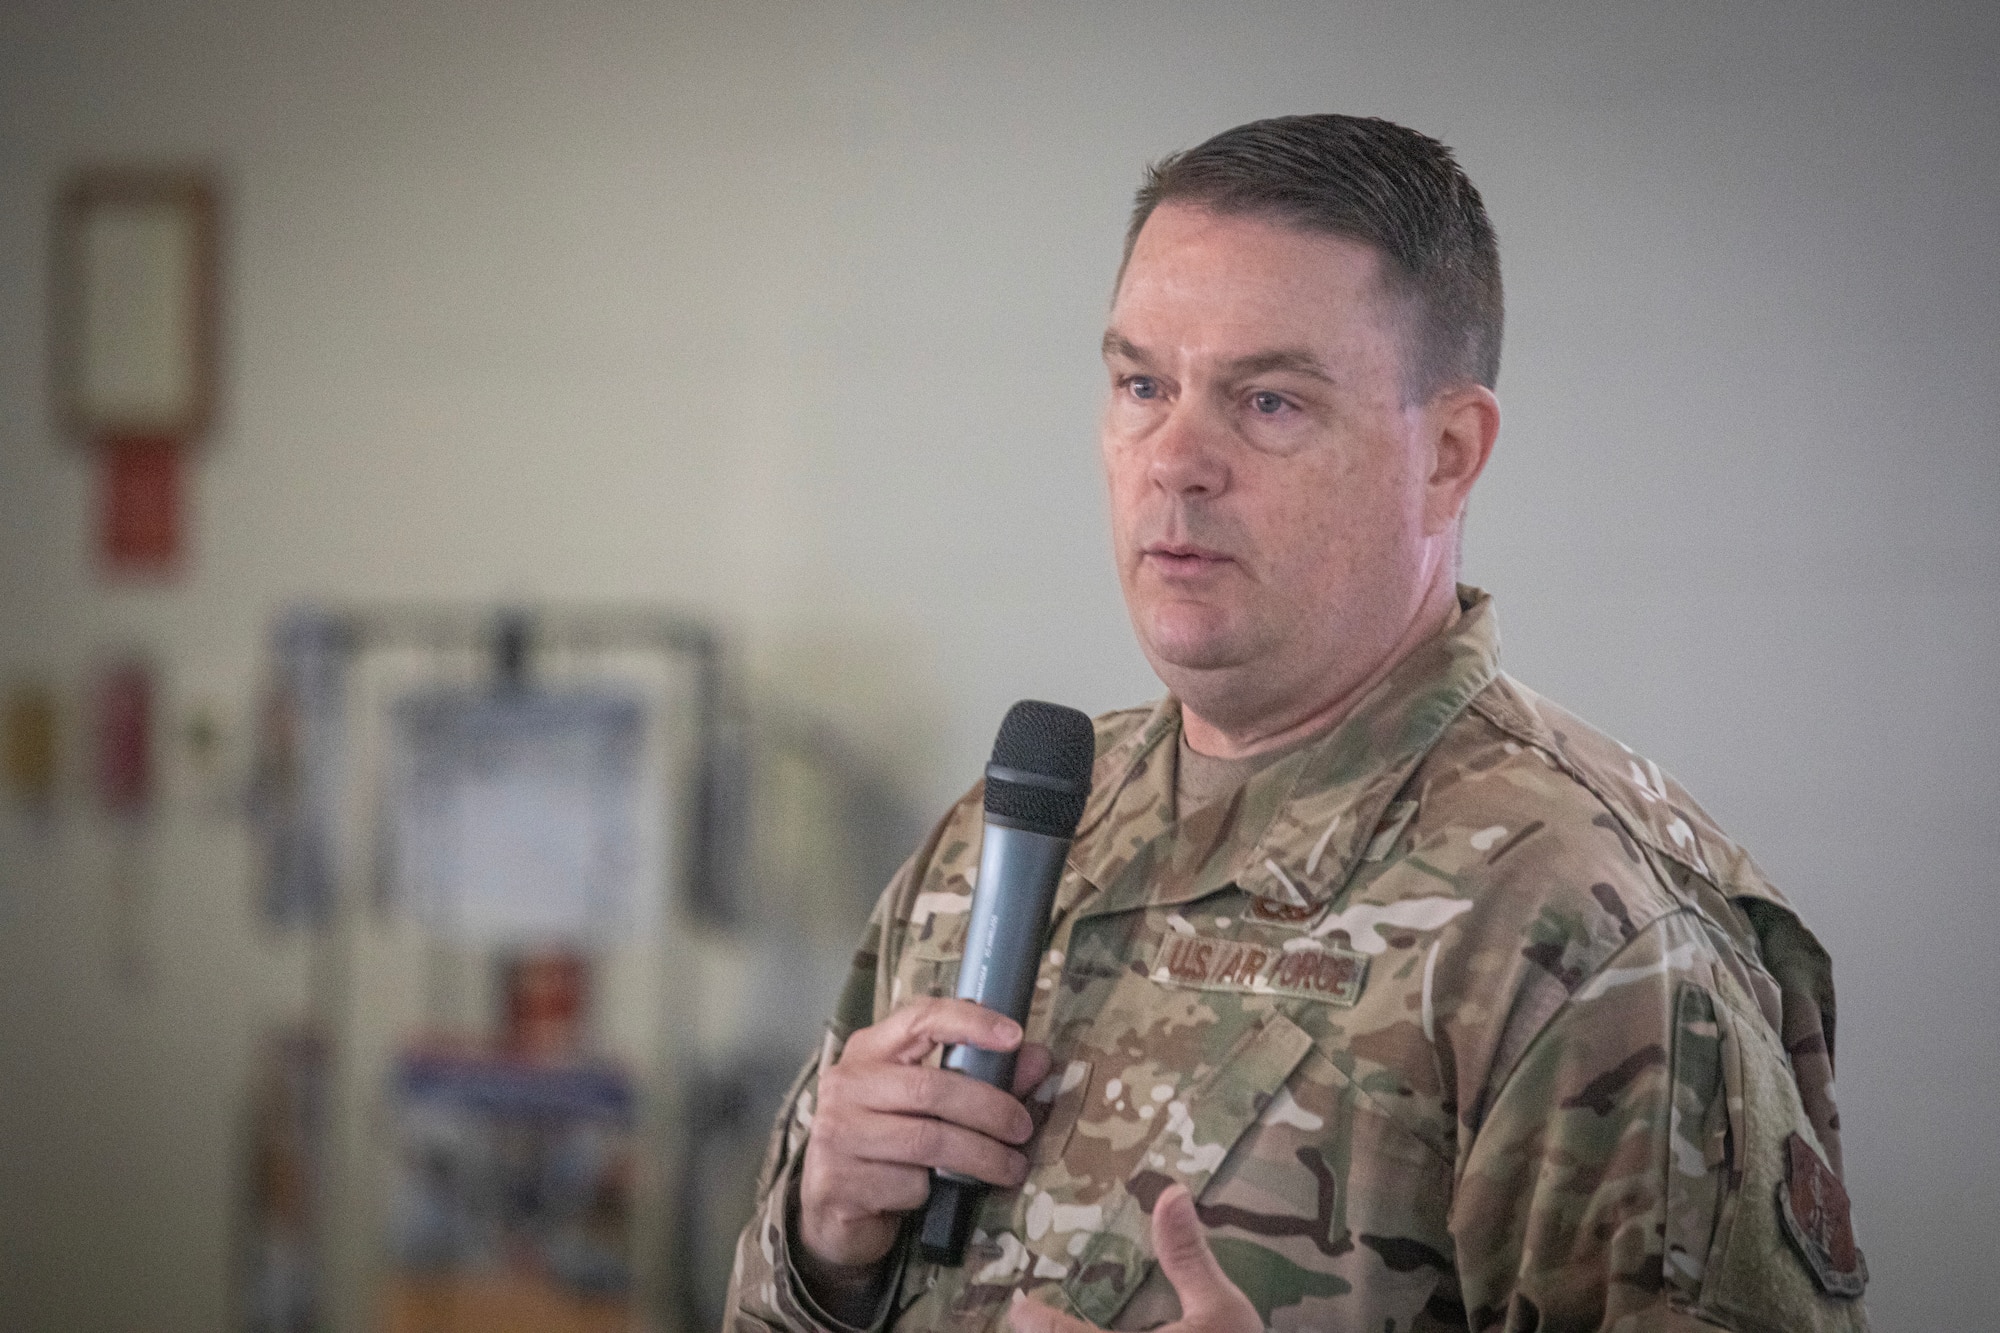 Brig. Gen. Patrick Kennedy, Commander of the New Jersey Air National Guard, and Assistant Adjutant General-Air, speaks at the 5th Annual O-6/E-9 Summit held at the 177th Fighter Wing on Atlantic City Air National Guard Base, New Jersey, June 7, 2023.